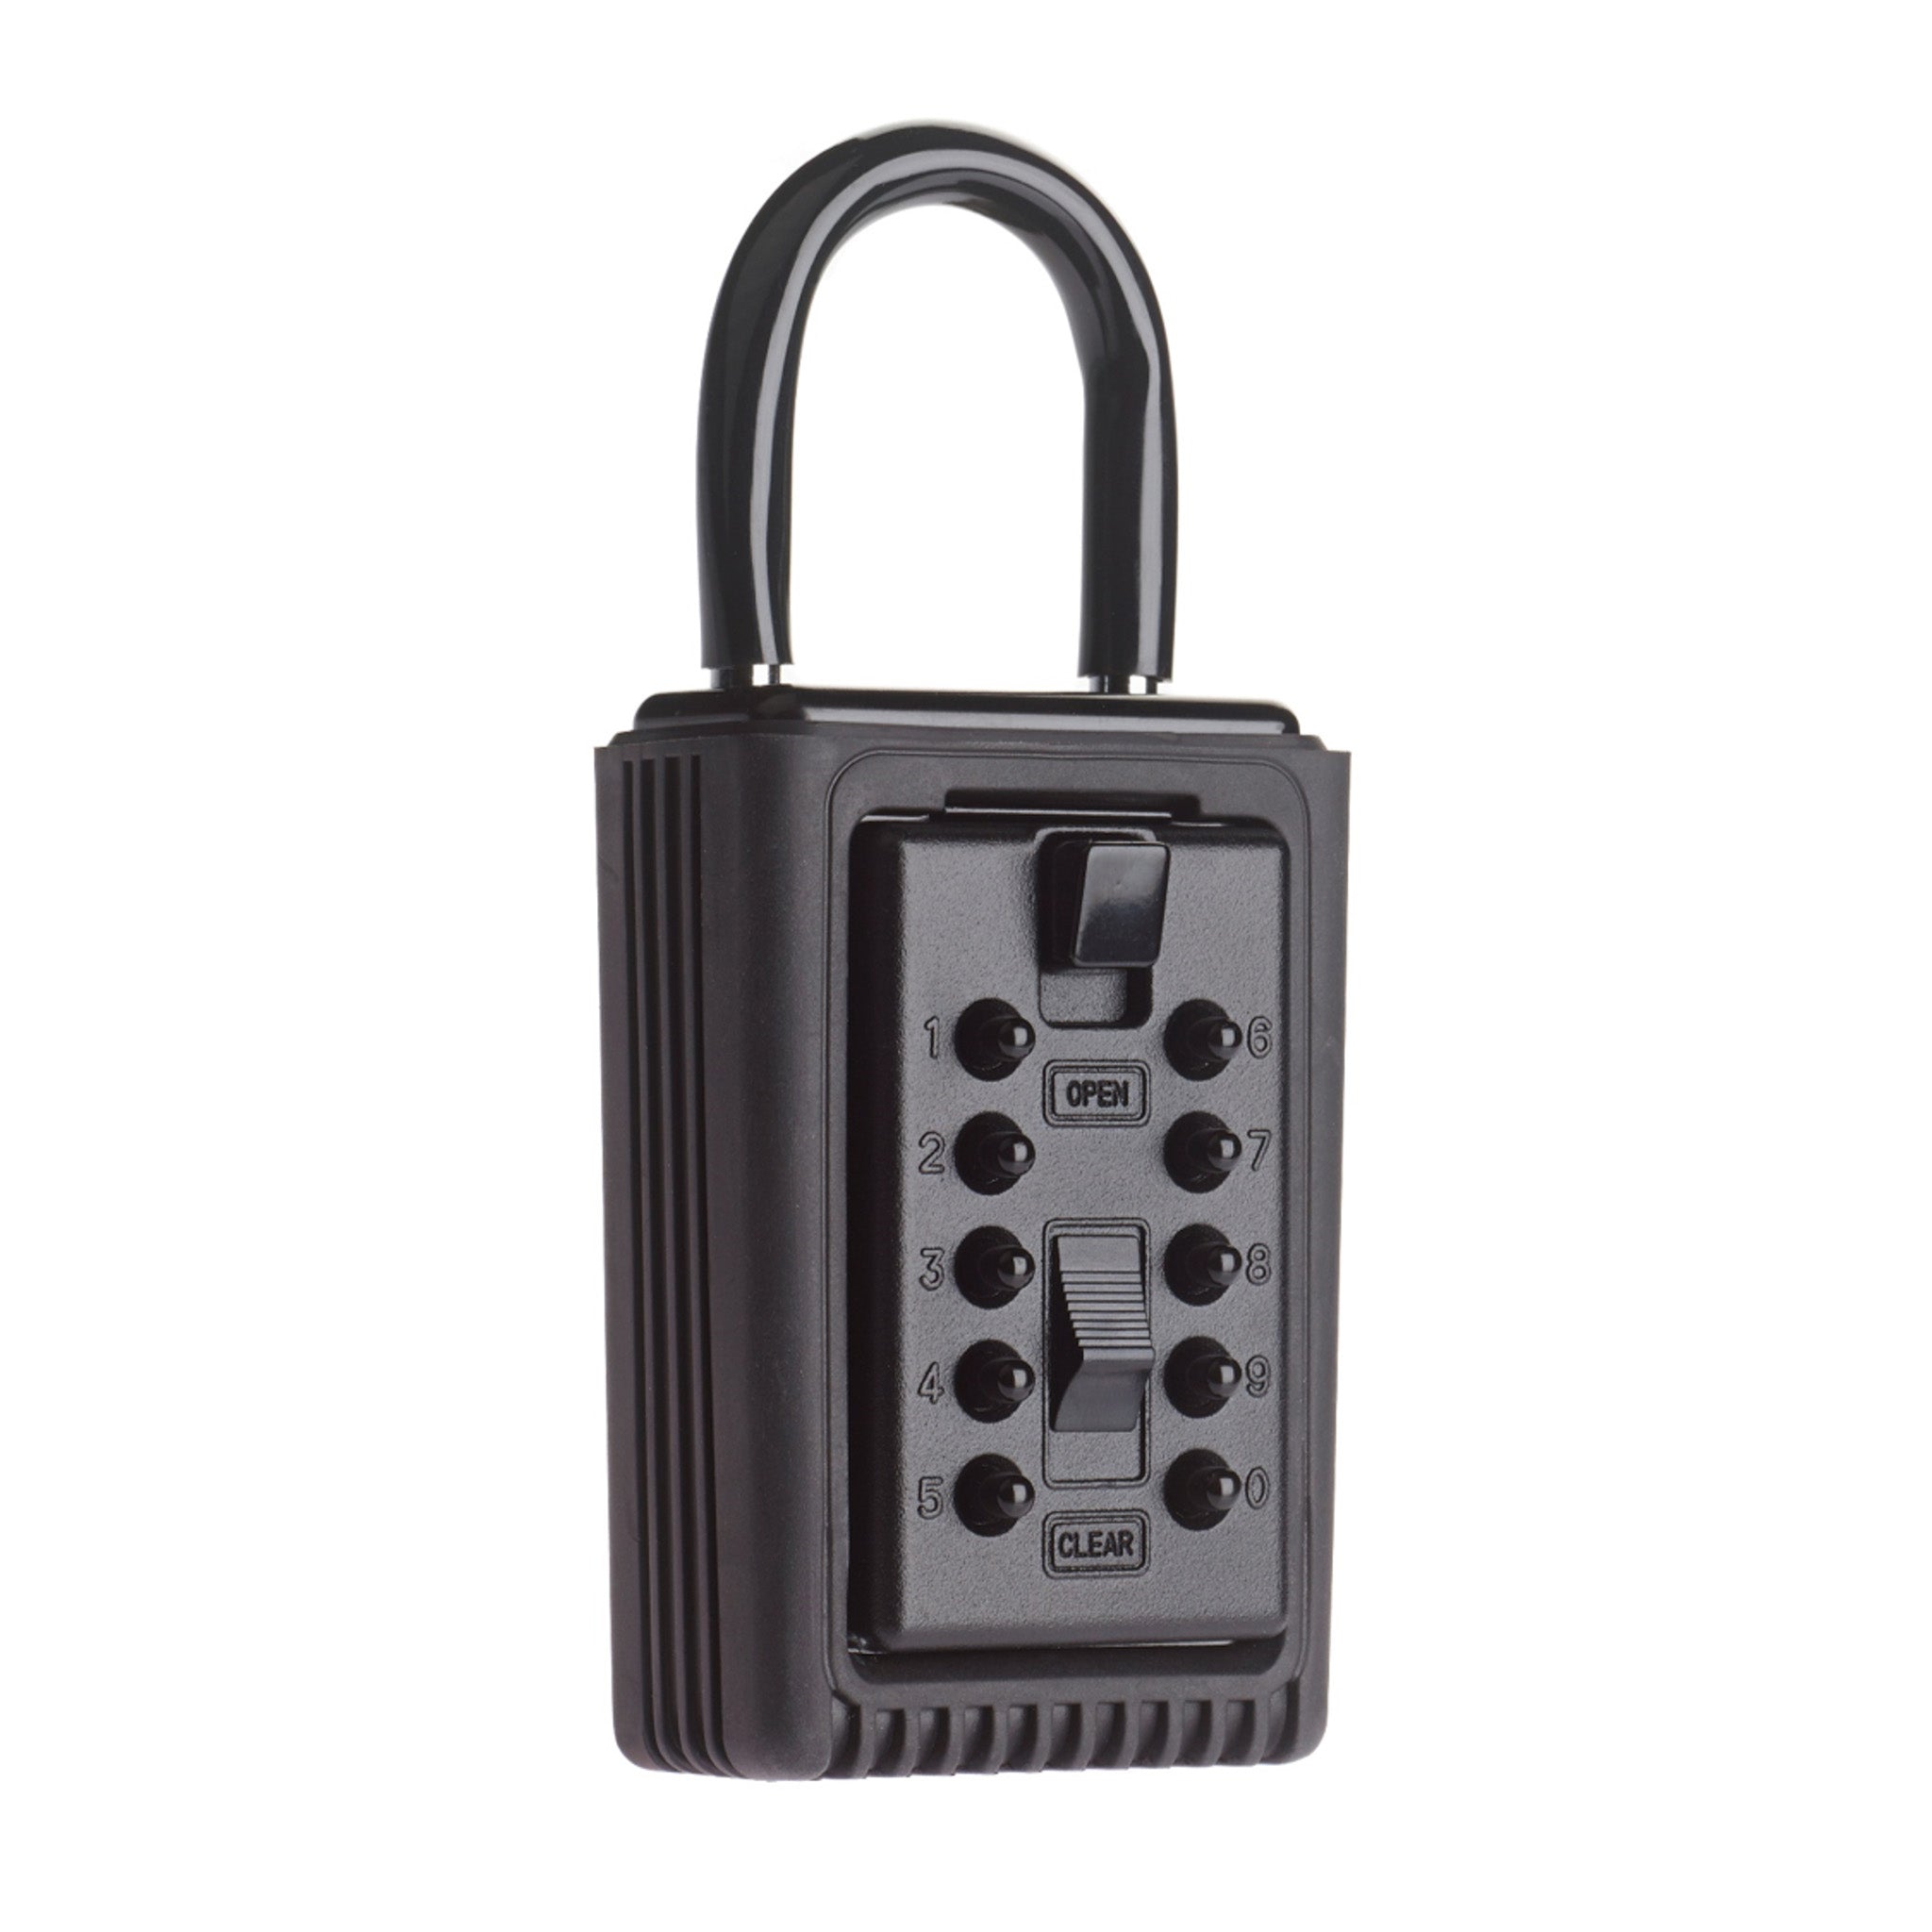 Supra portable key safe with shackle for temporary access management